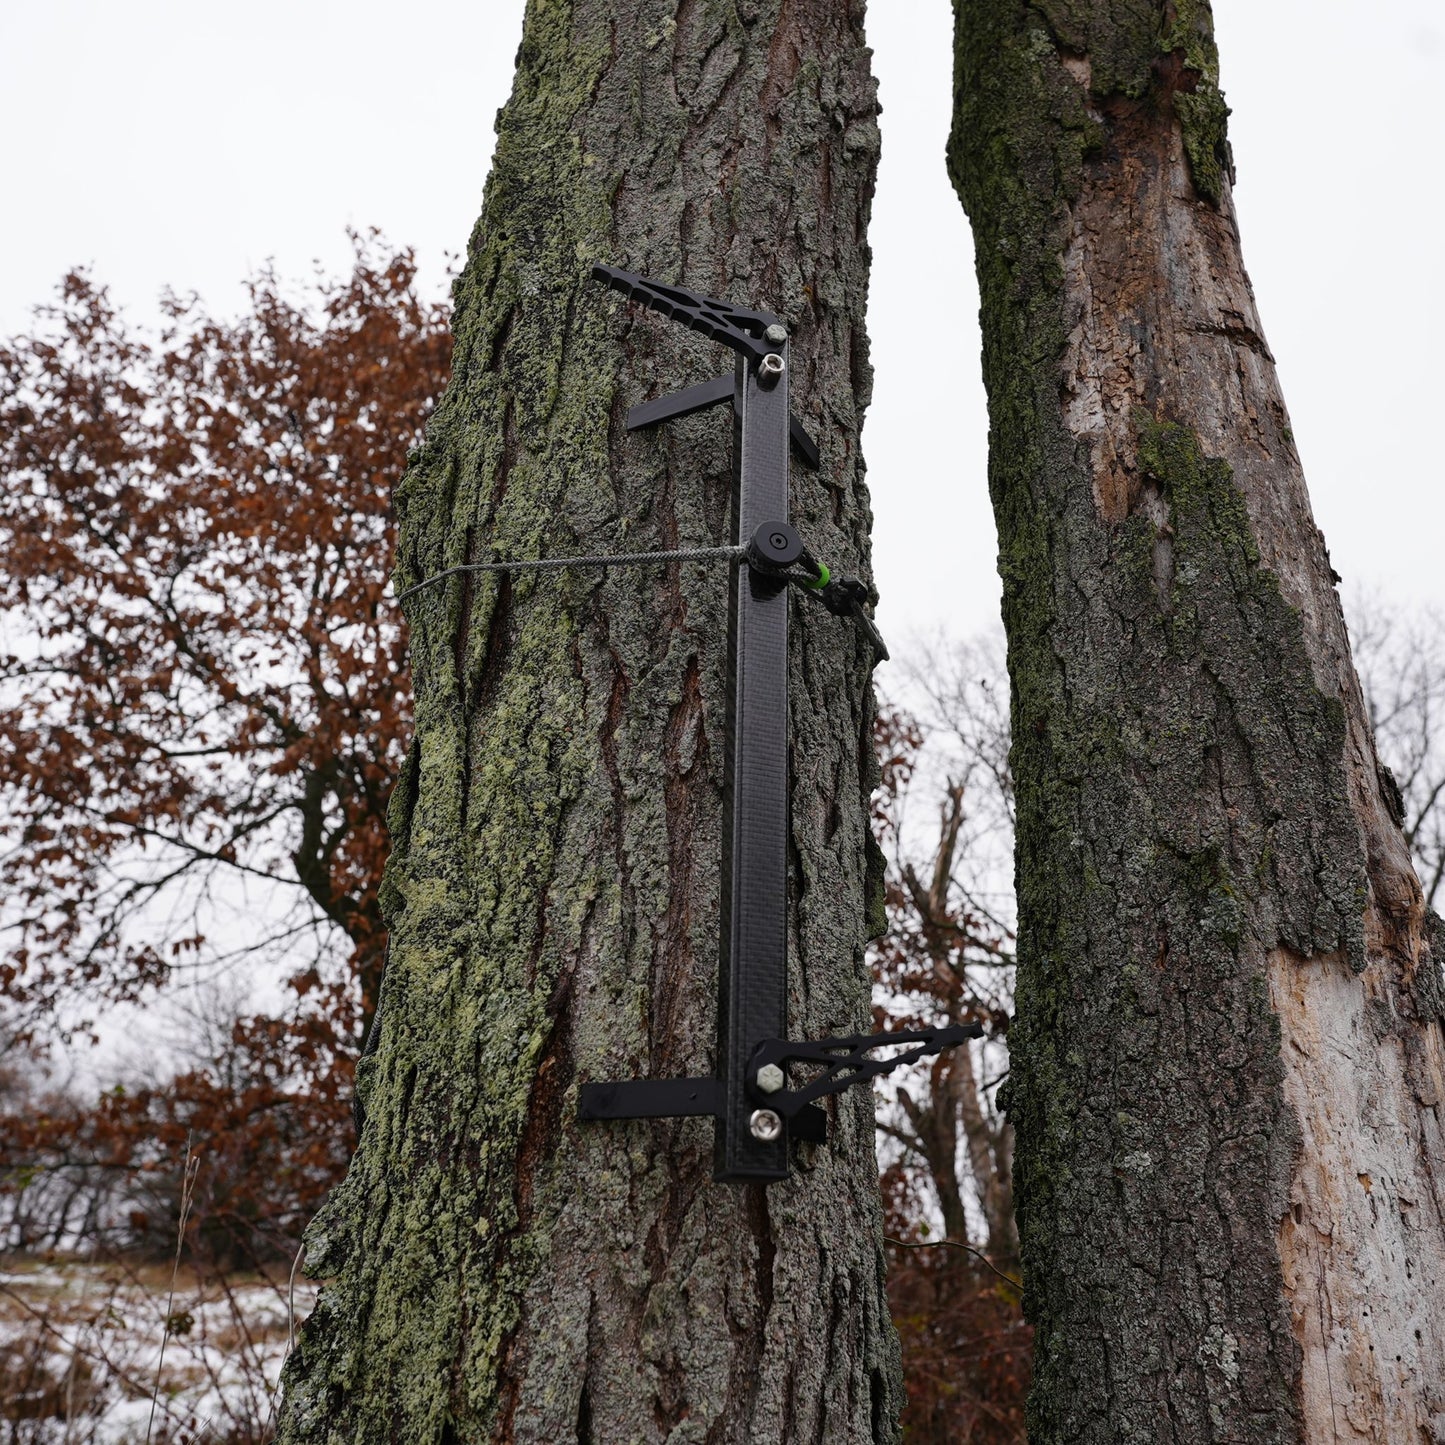 Cat Trax Commando (light weight climbing stick) secured to tree with amsteel rope mod